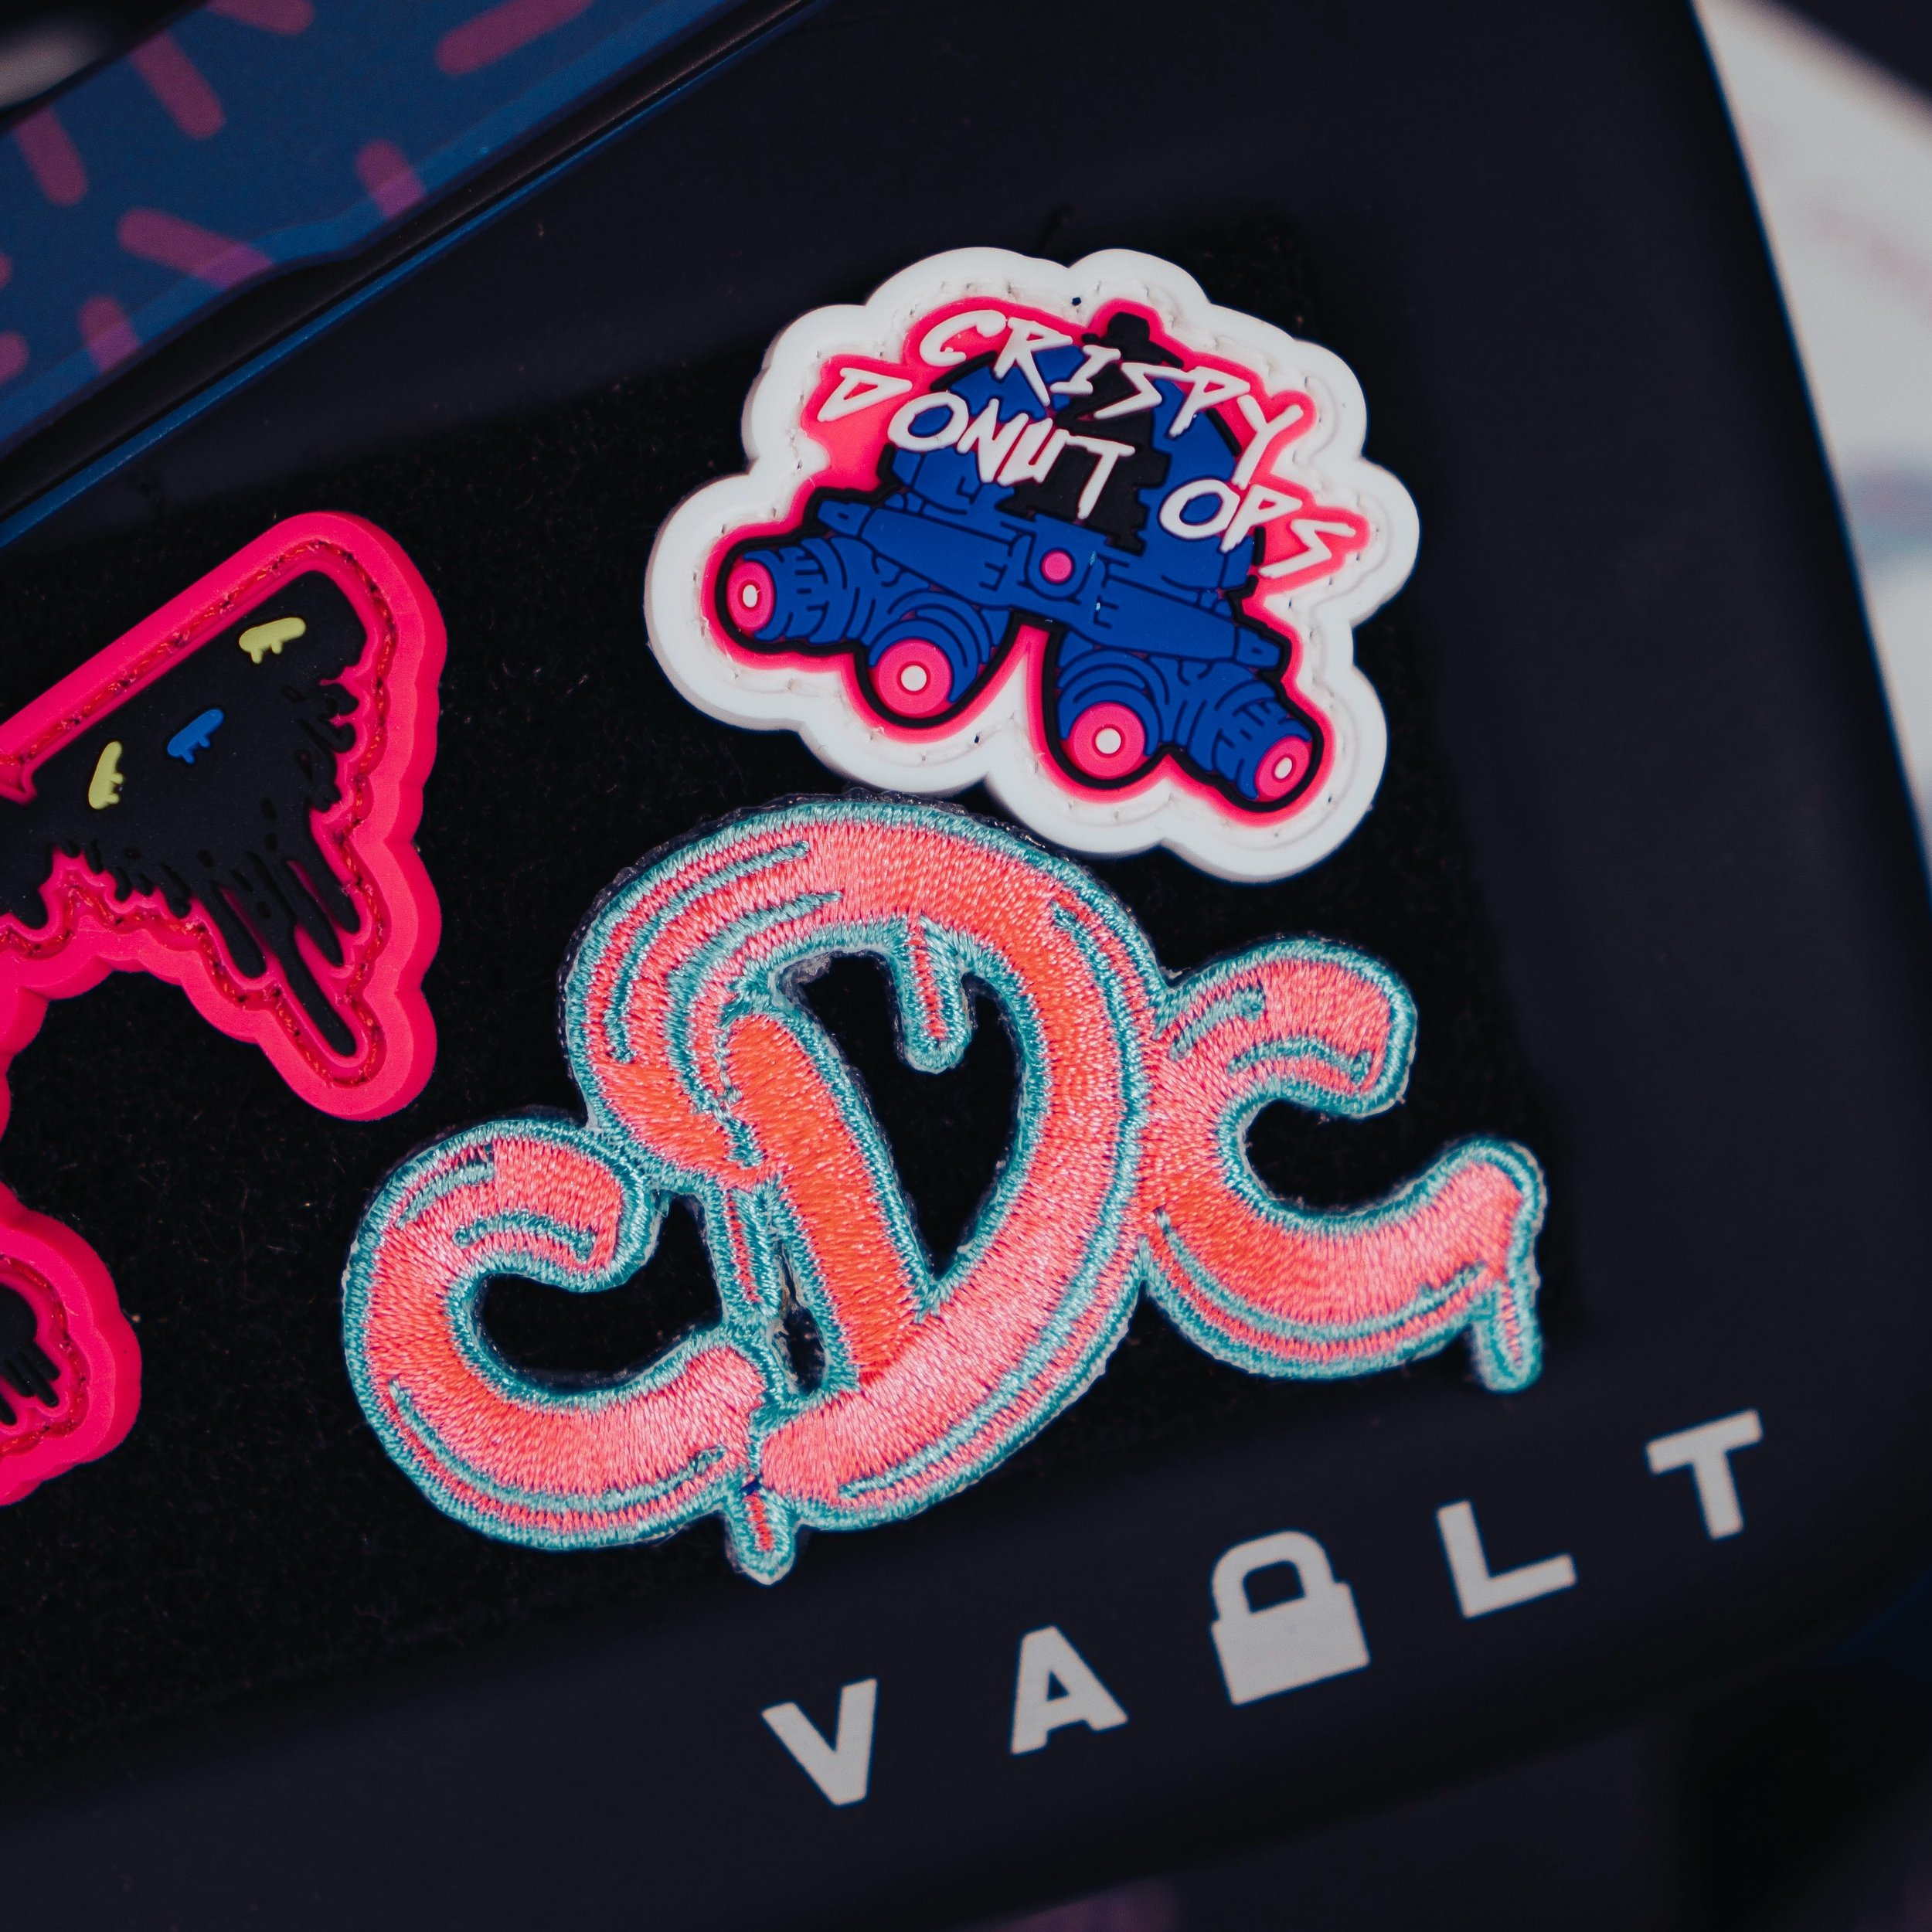 Join our monthly patch club today and get some SWEET EDC ESSENTIALS with our amazing patches. 

www.DONUTKNIFE.com

#patch #patchgame #edc #cdc #cdcedc #essential #fun #jvke #classy #gear #vip #exclusive #sweet #club #donuts

Photo Credit: @barbarian